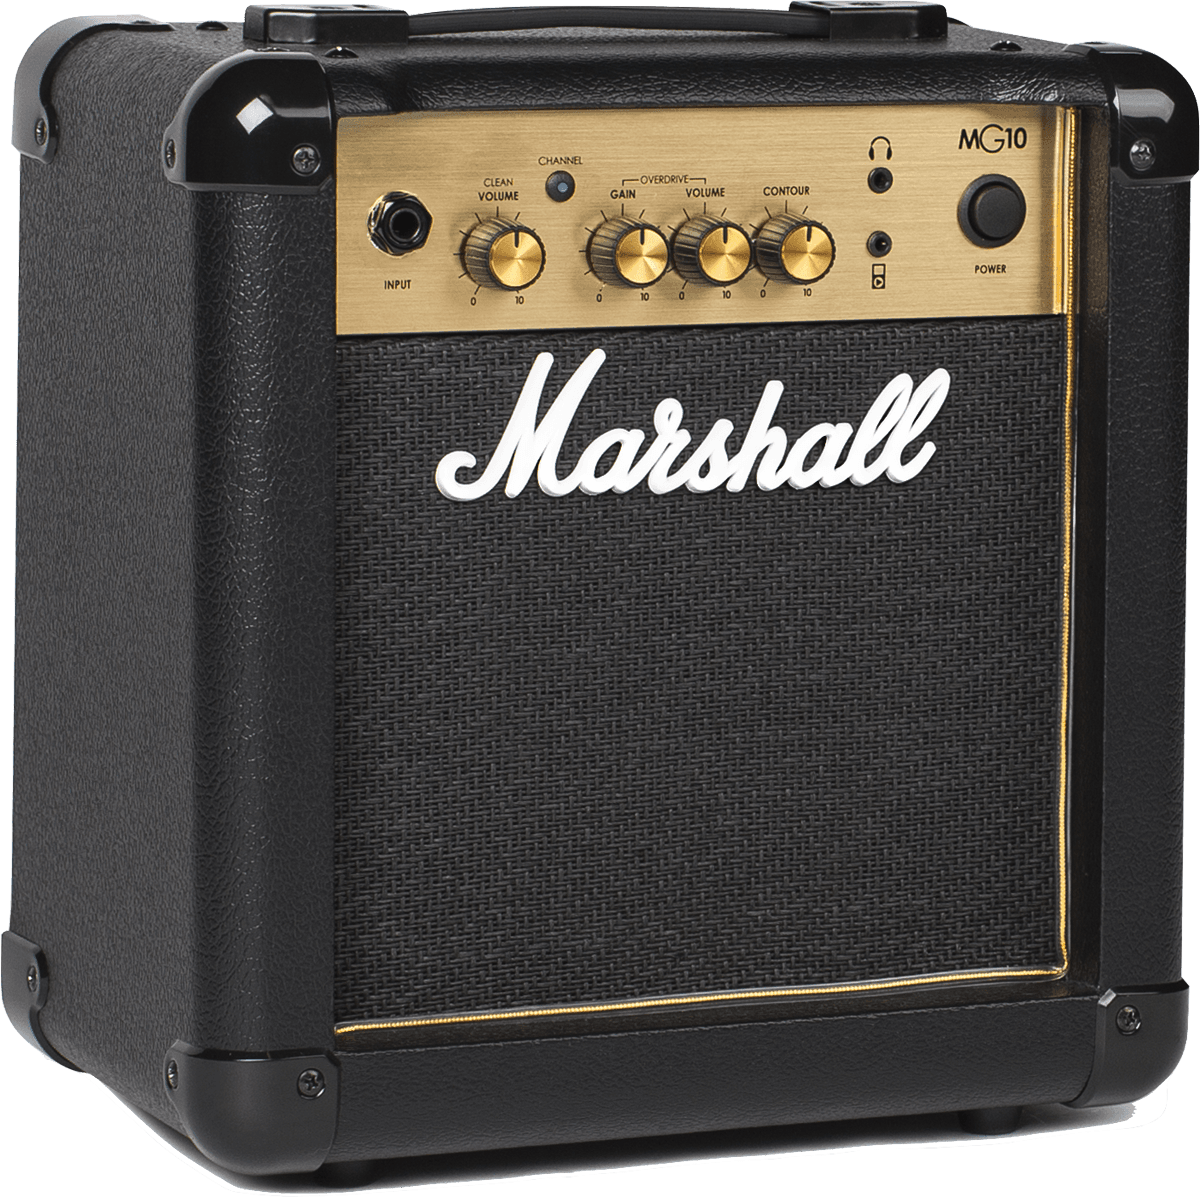 Eastone Tl70 +marshall Mg10 +housse +courroie +cable +mediators - Ivory - Pack Guitare Électrique - Variation 6